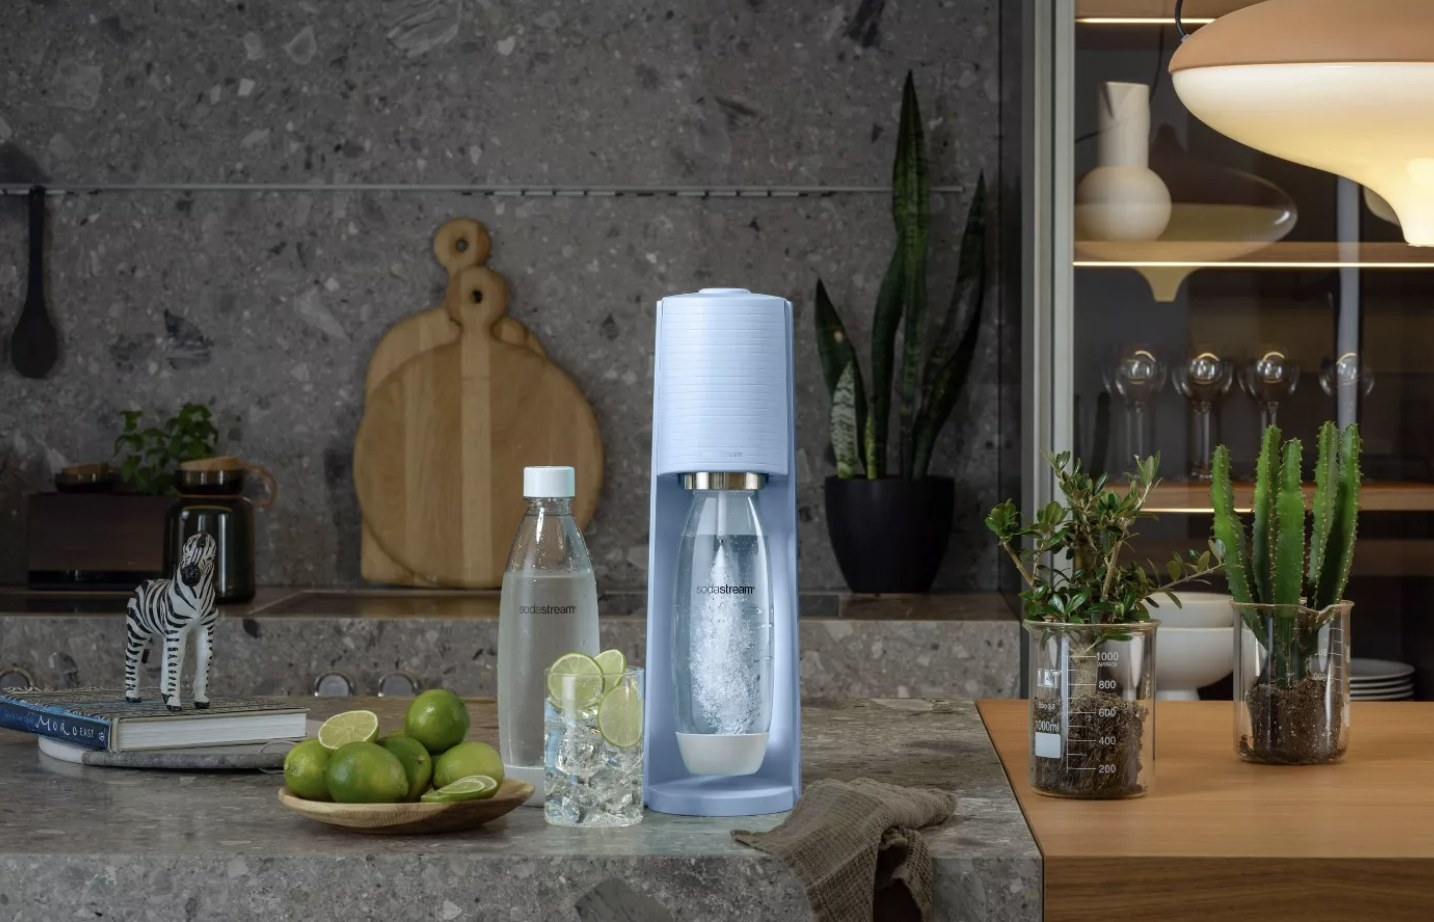 The sodastream making sparkling water